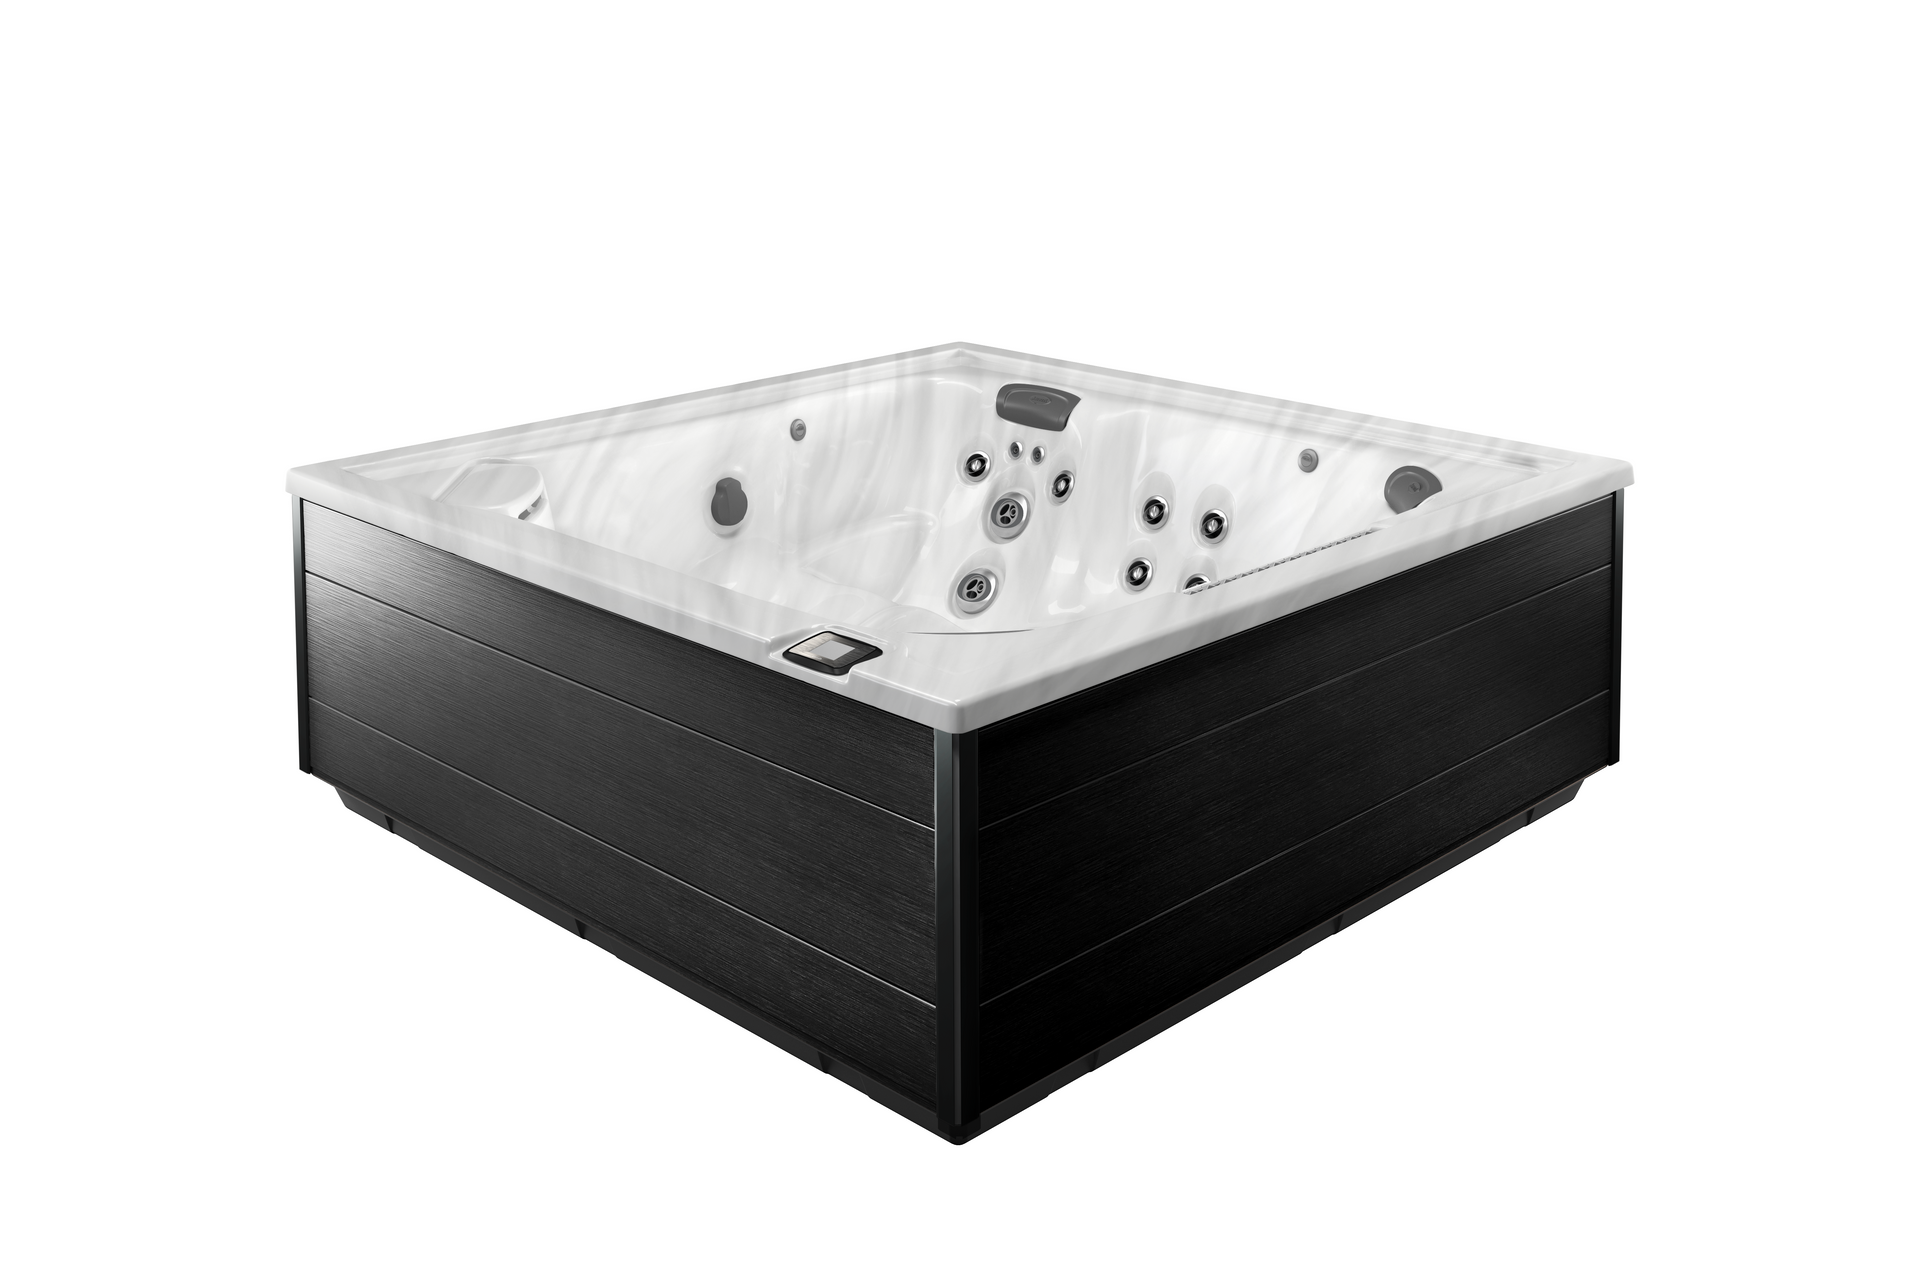 The Jacuzzi J-LXL Offers Premier Wellness & Relaxation Benefits